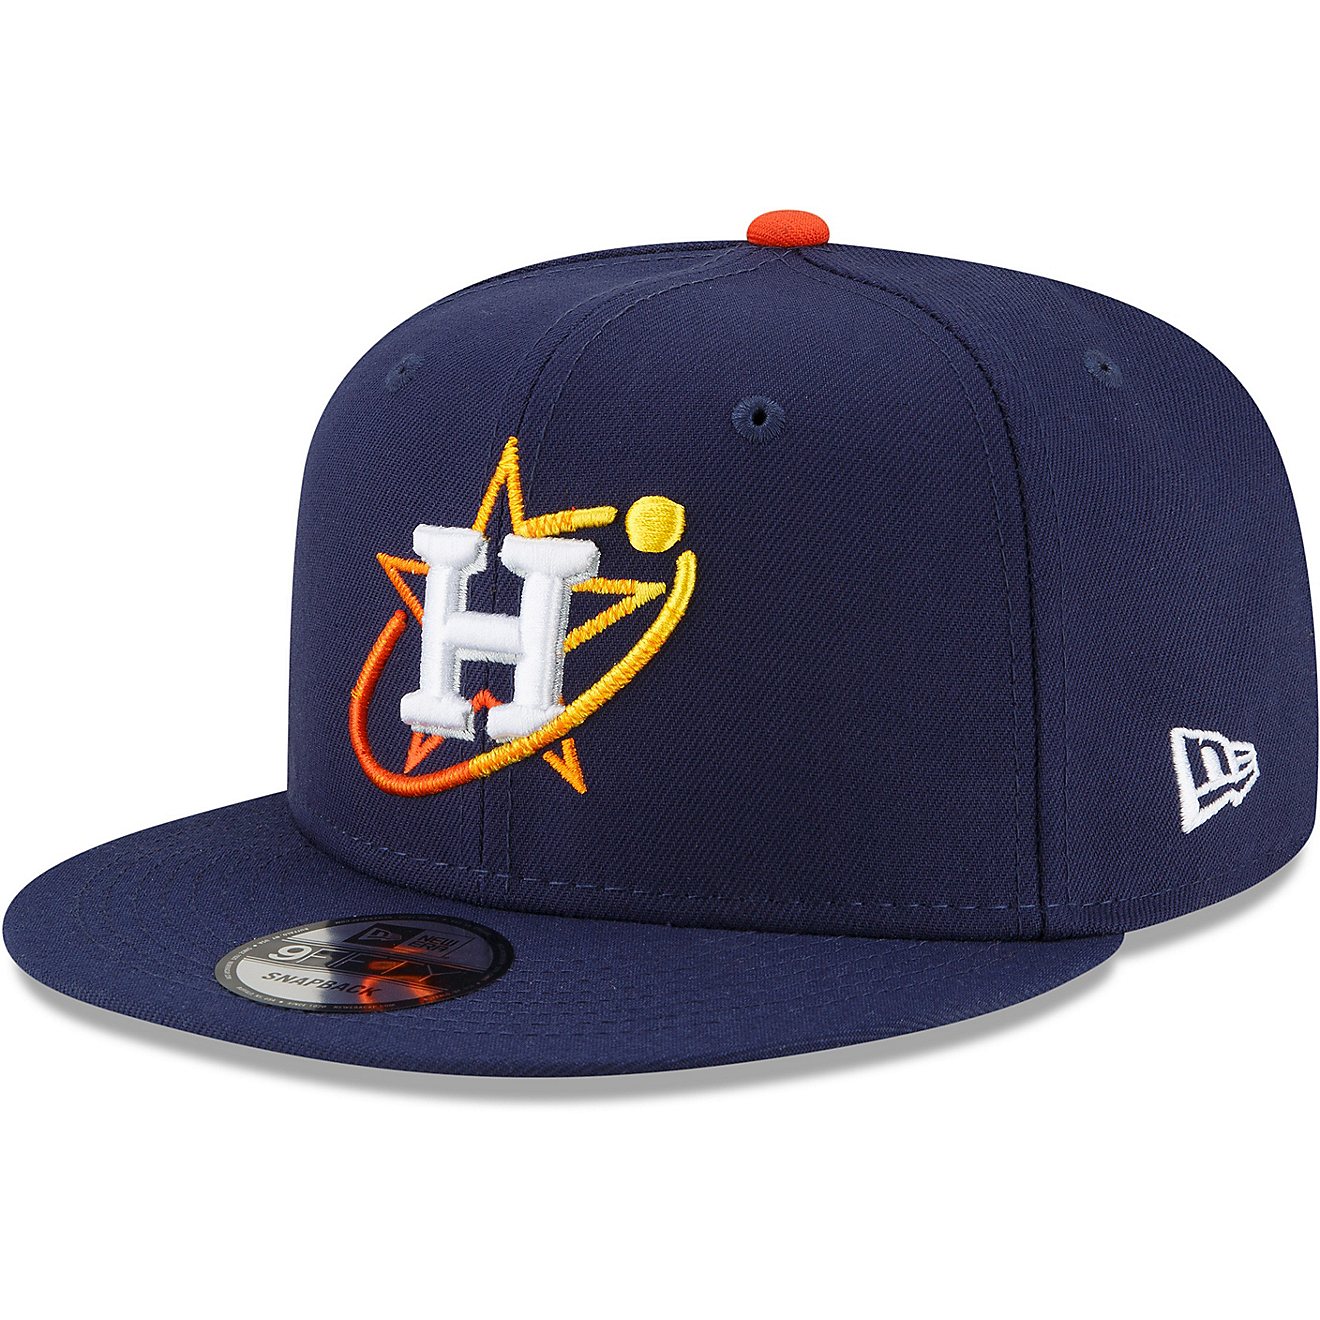 New Era Men's Houston Astros City Connect 9FIFTY Cap                                                                             - view number 1